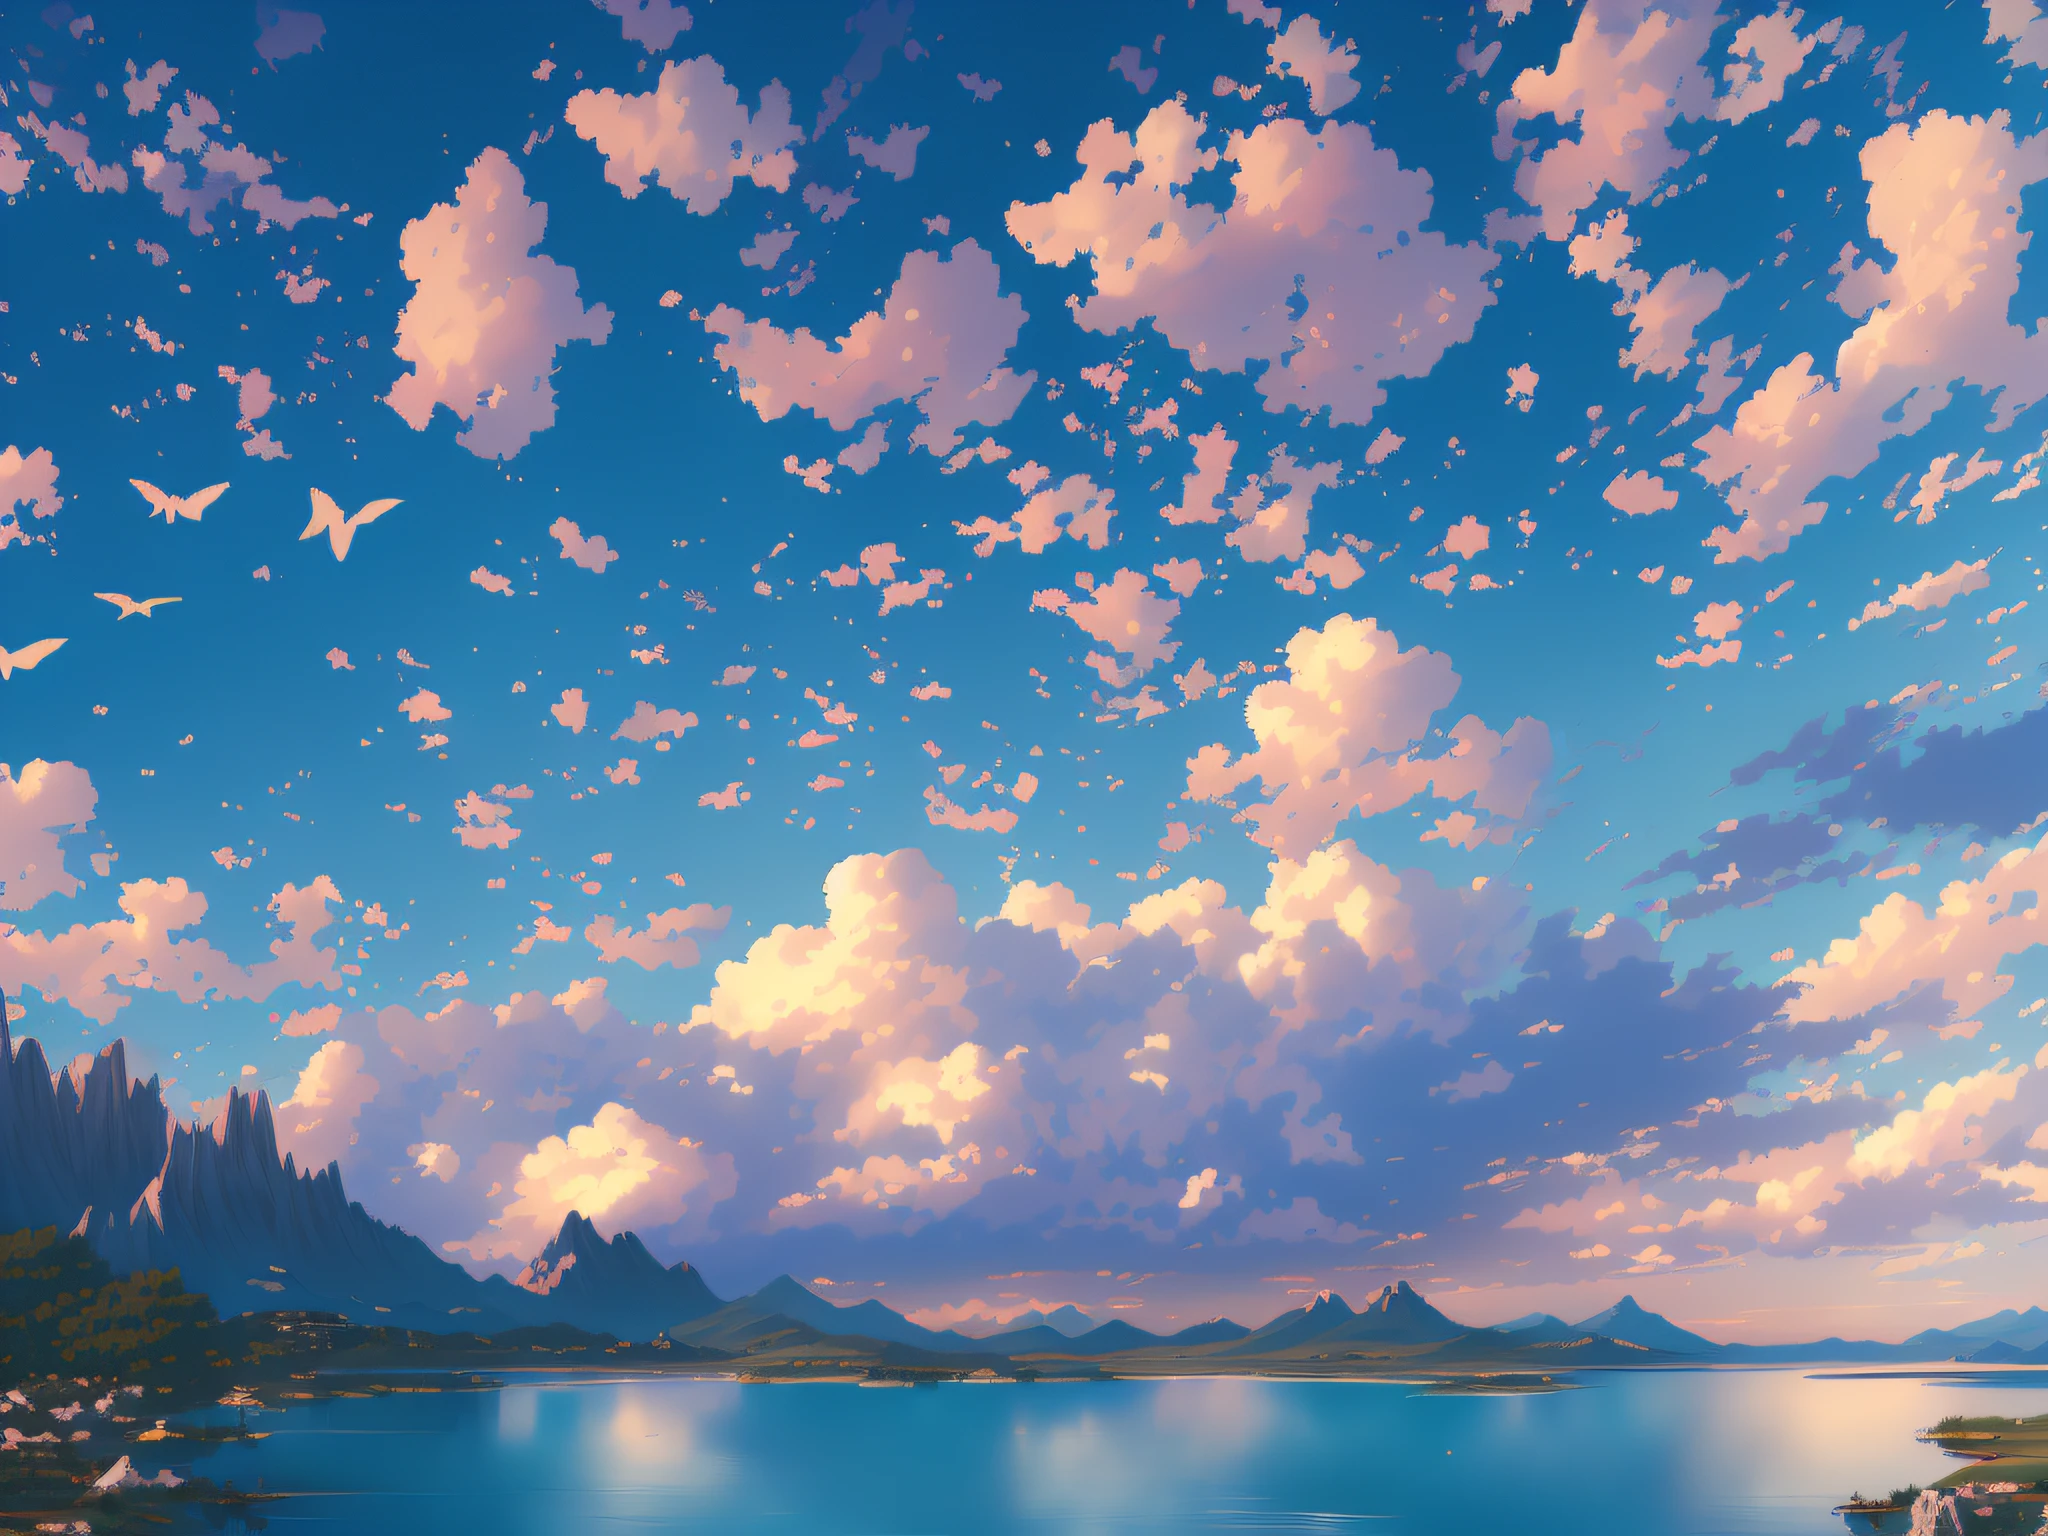 there is a painting of a beautiful mountain lake with birds flying in the sky, detailed scenery —width 672, beautifull puffy clouds. anime, anime landscape wallpaper, anime clouds, anime landscape, beautiful anime scenery, anime beautiful peace scene, beautiful anime scene, fluffy pink anime clouds, ross tran. scenic background, anime sky, anime scenery, anime background